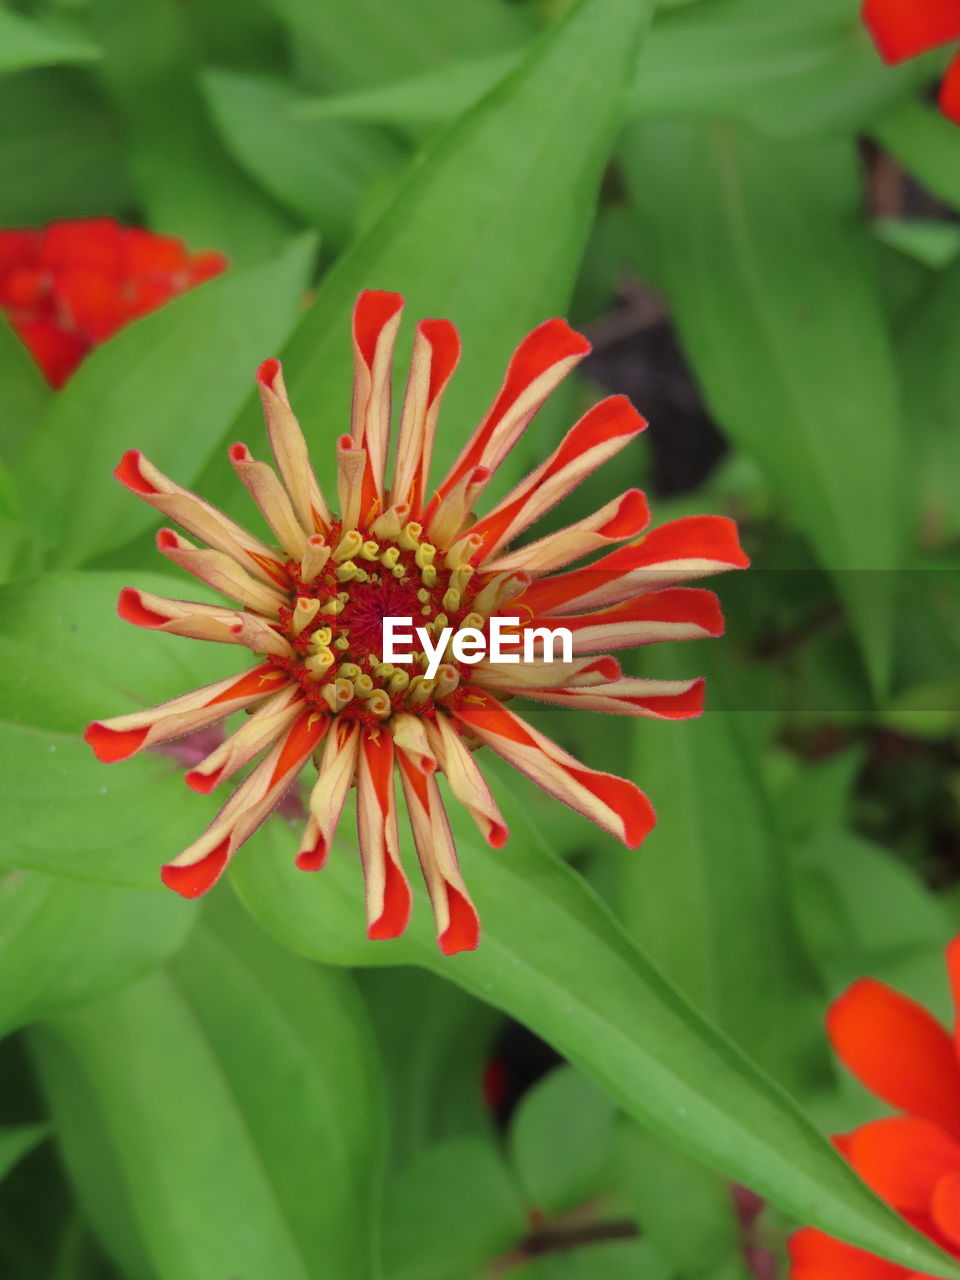 CLOSE-UP OF RED FLOWER AGAINST BLURRED BACKGROUND